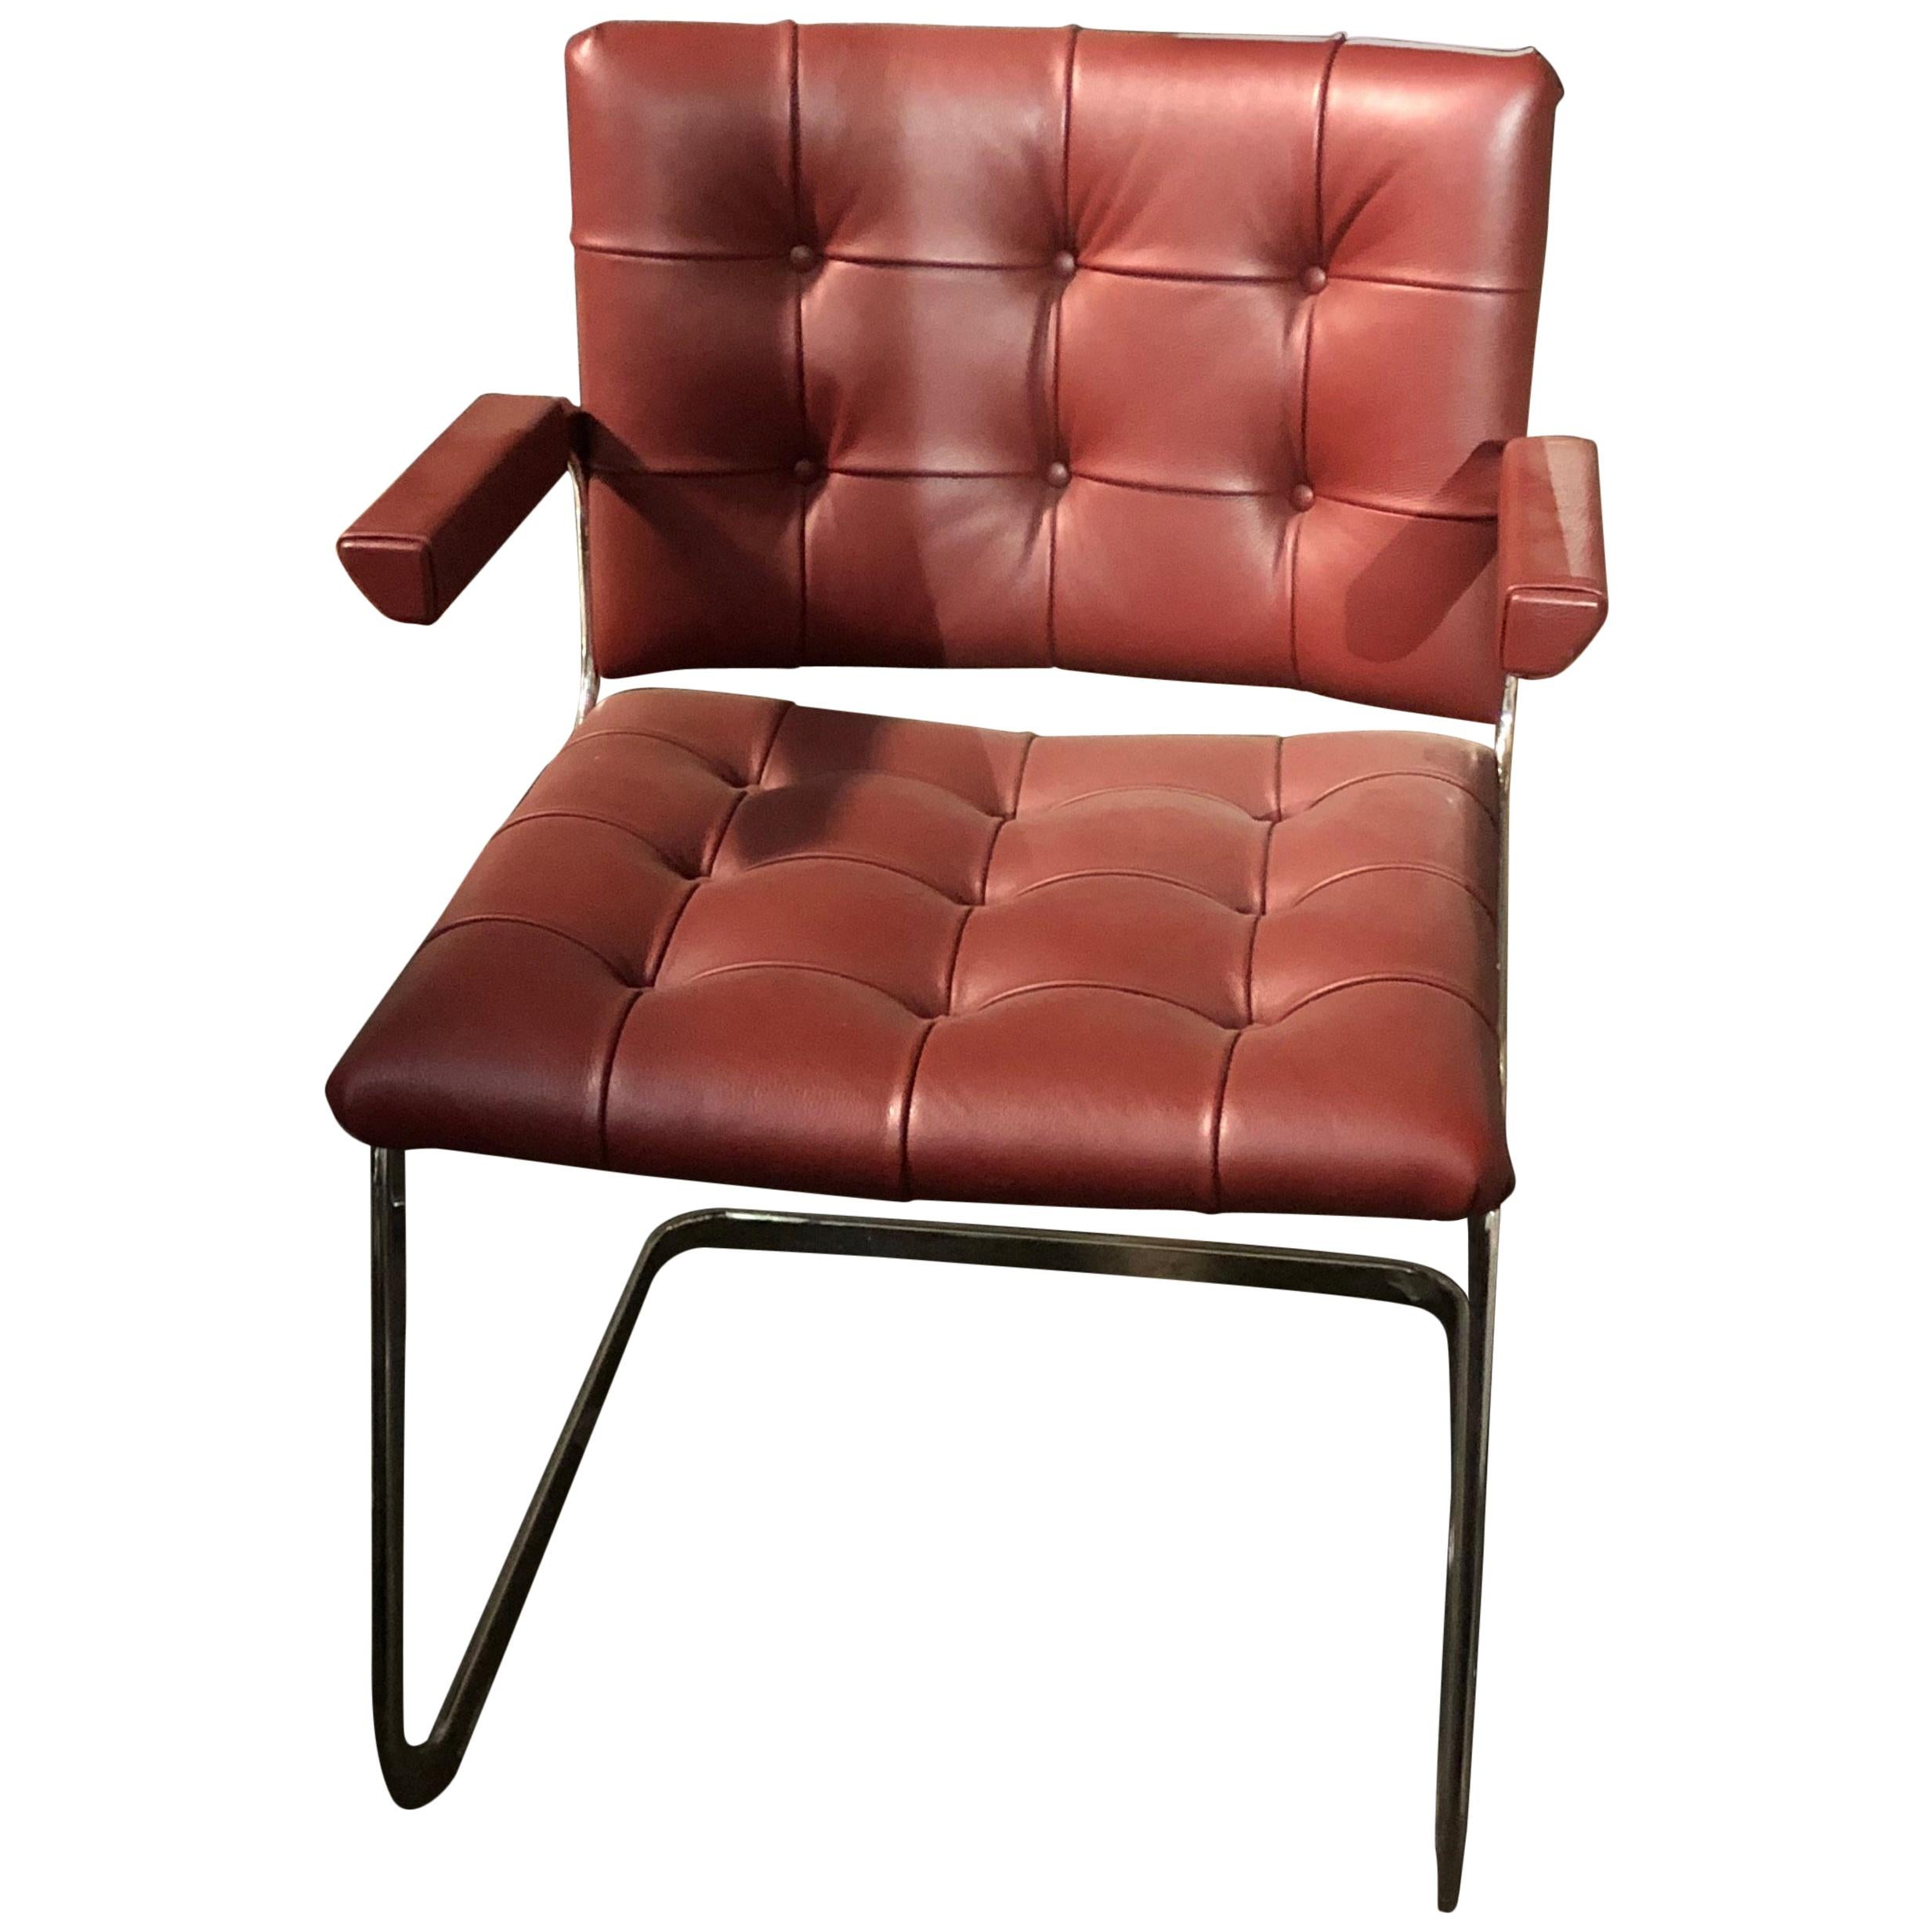 de Sede Classic Set of Three Haussmann RH 305 Red Leather Cantilever Armchairs